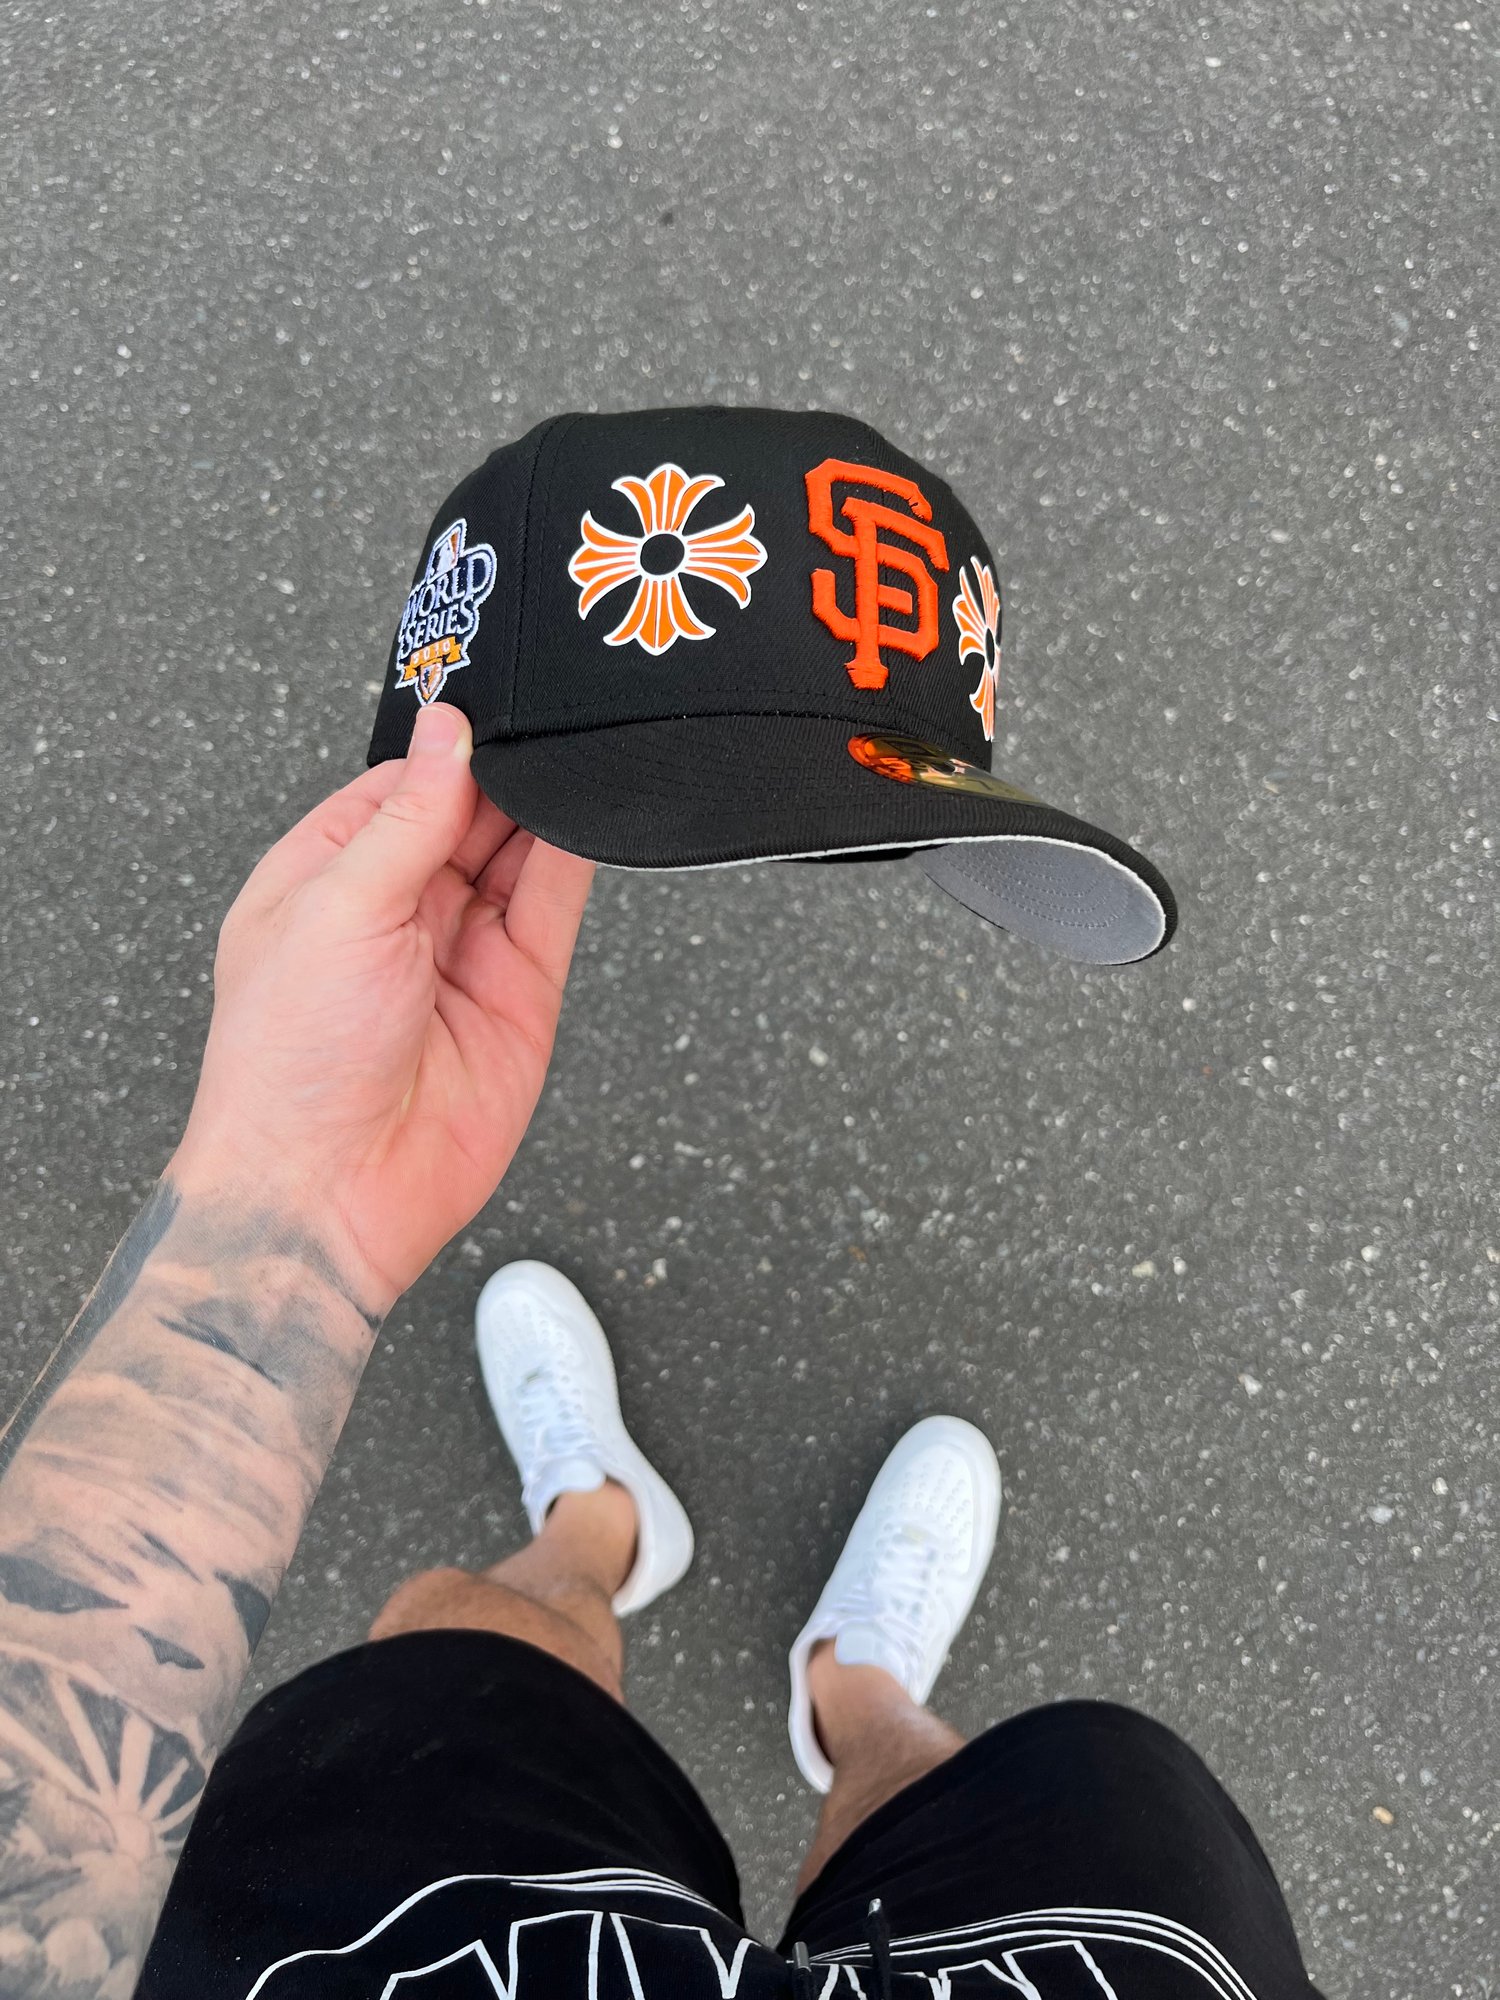 This is the cap of the San Francisco Giants